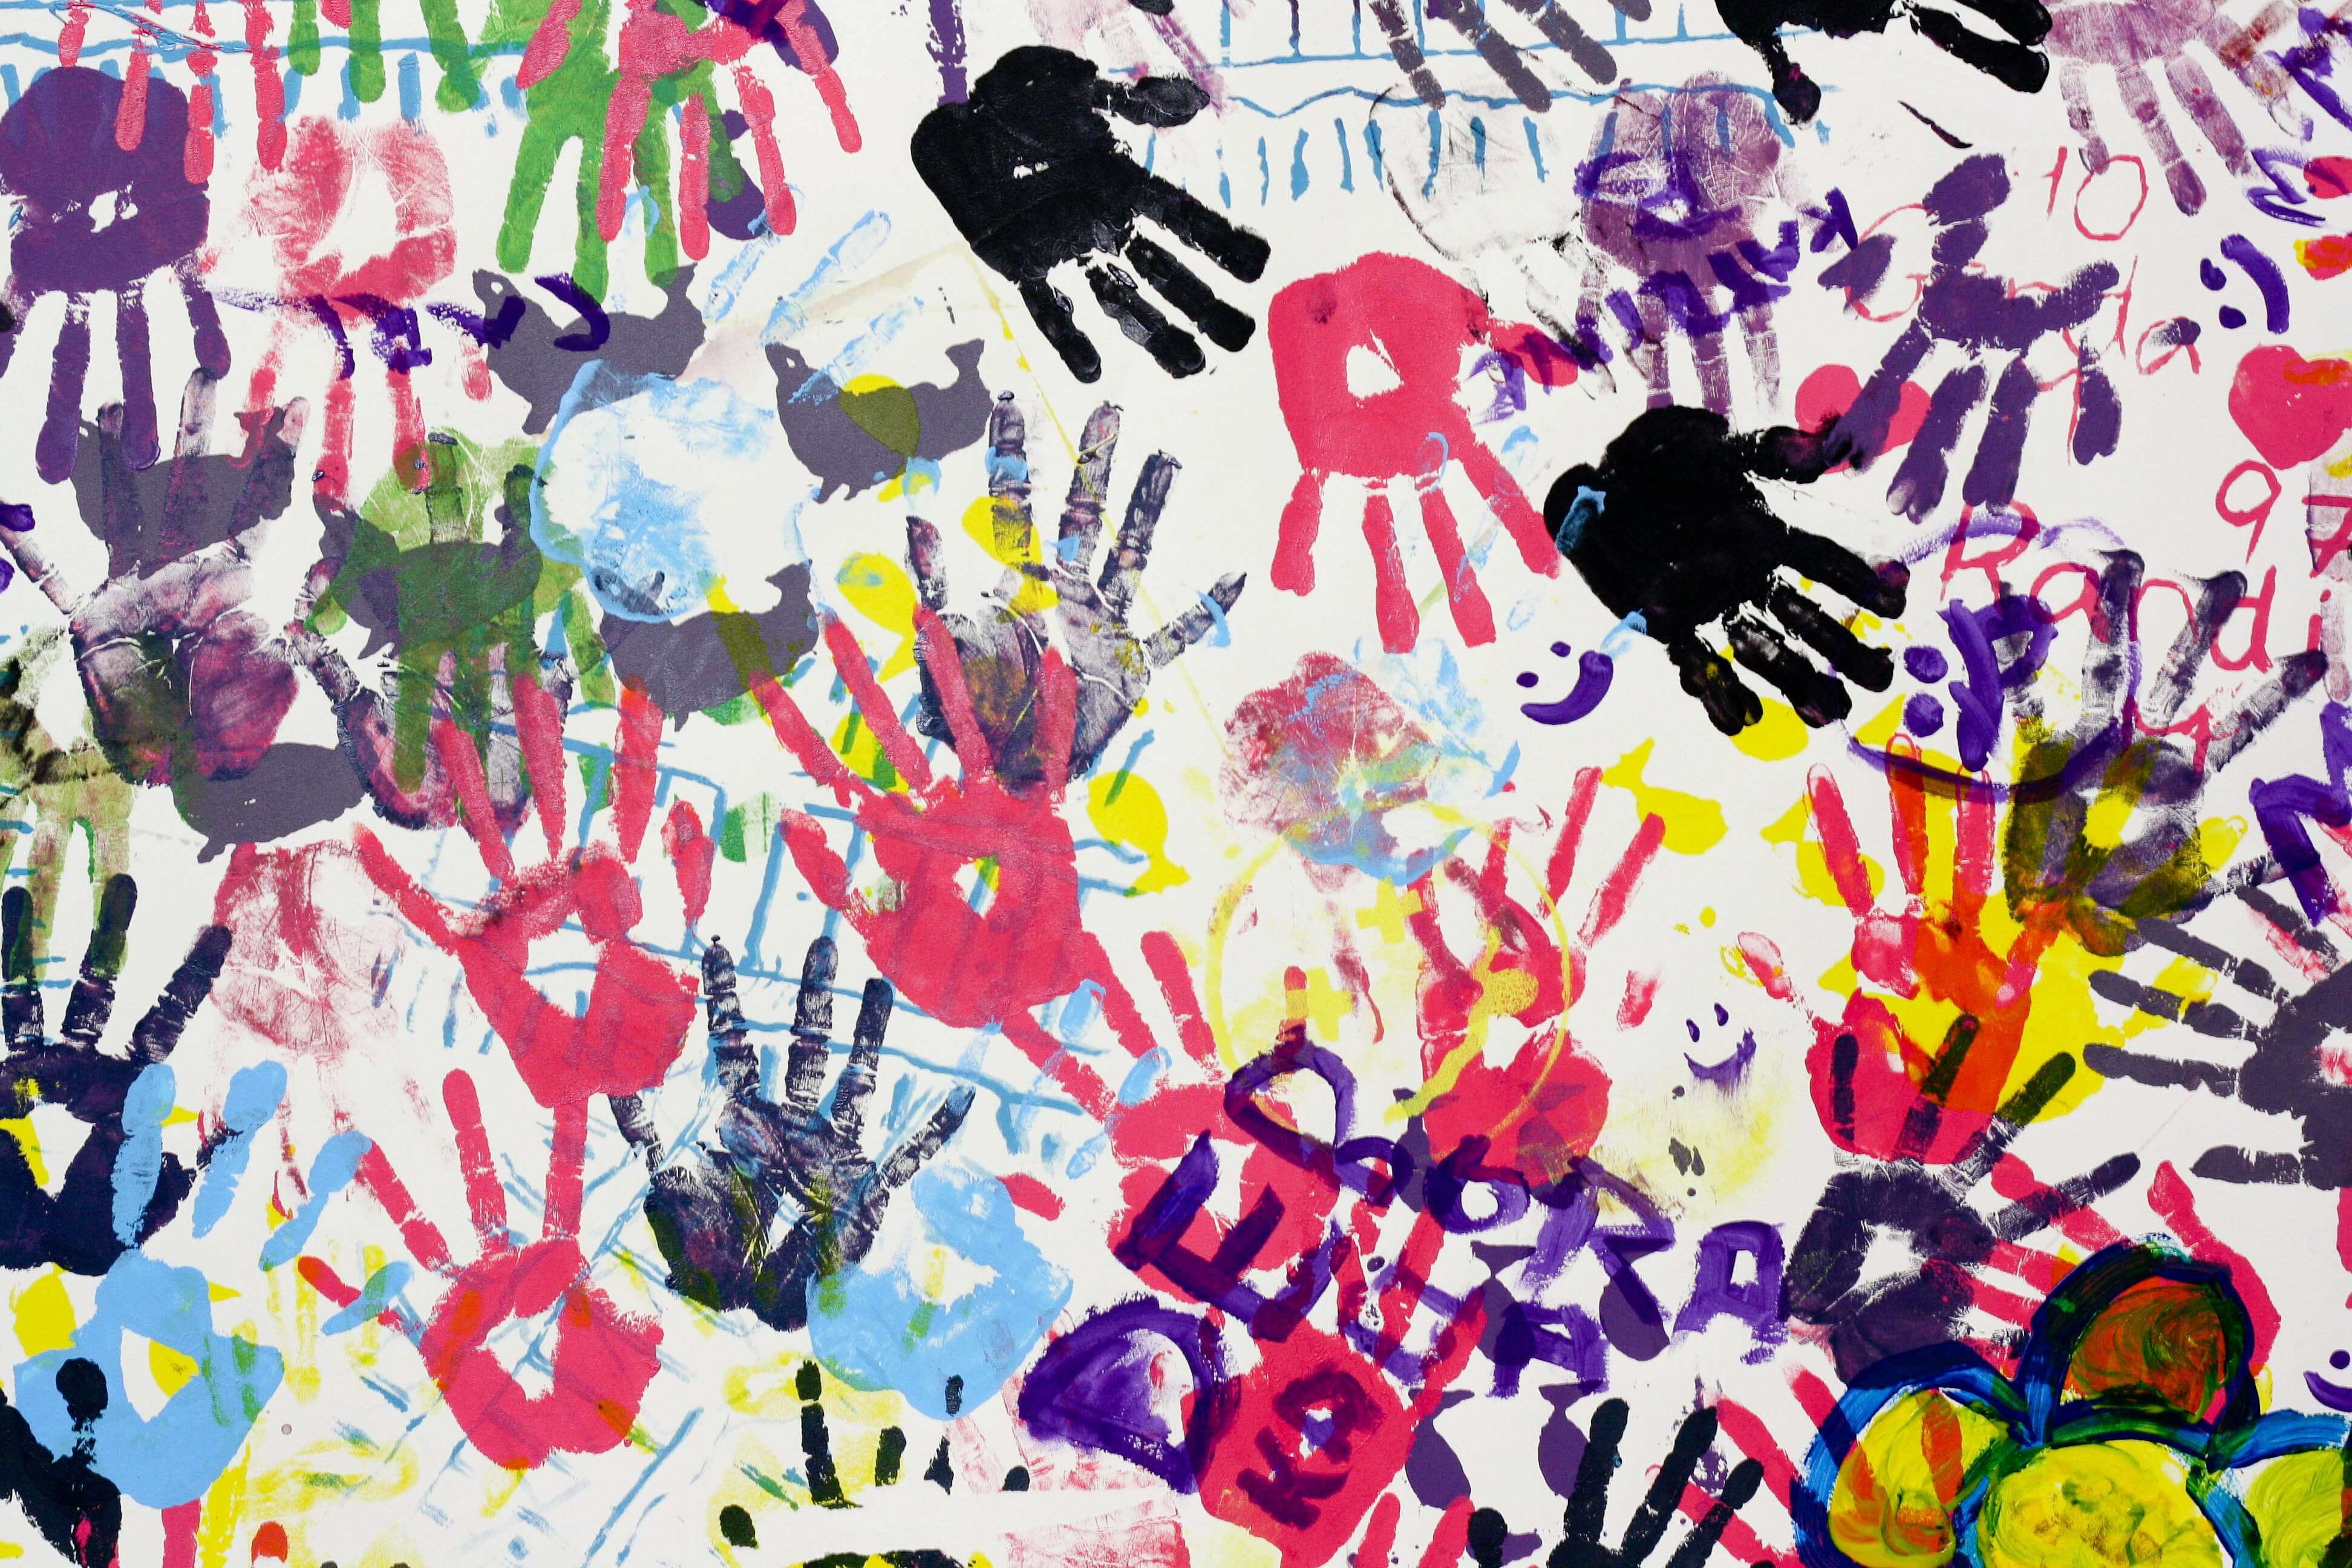 colorful handprints on a wall